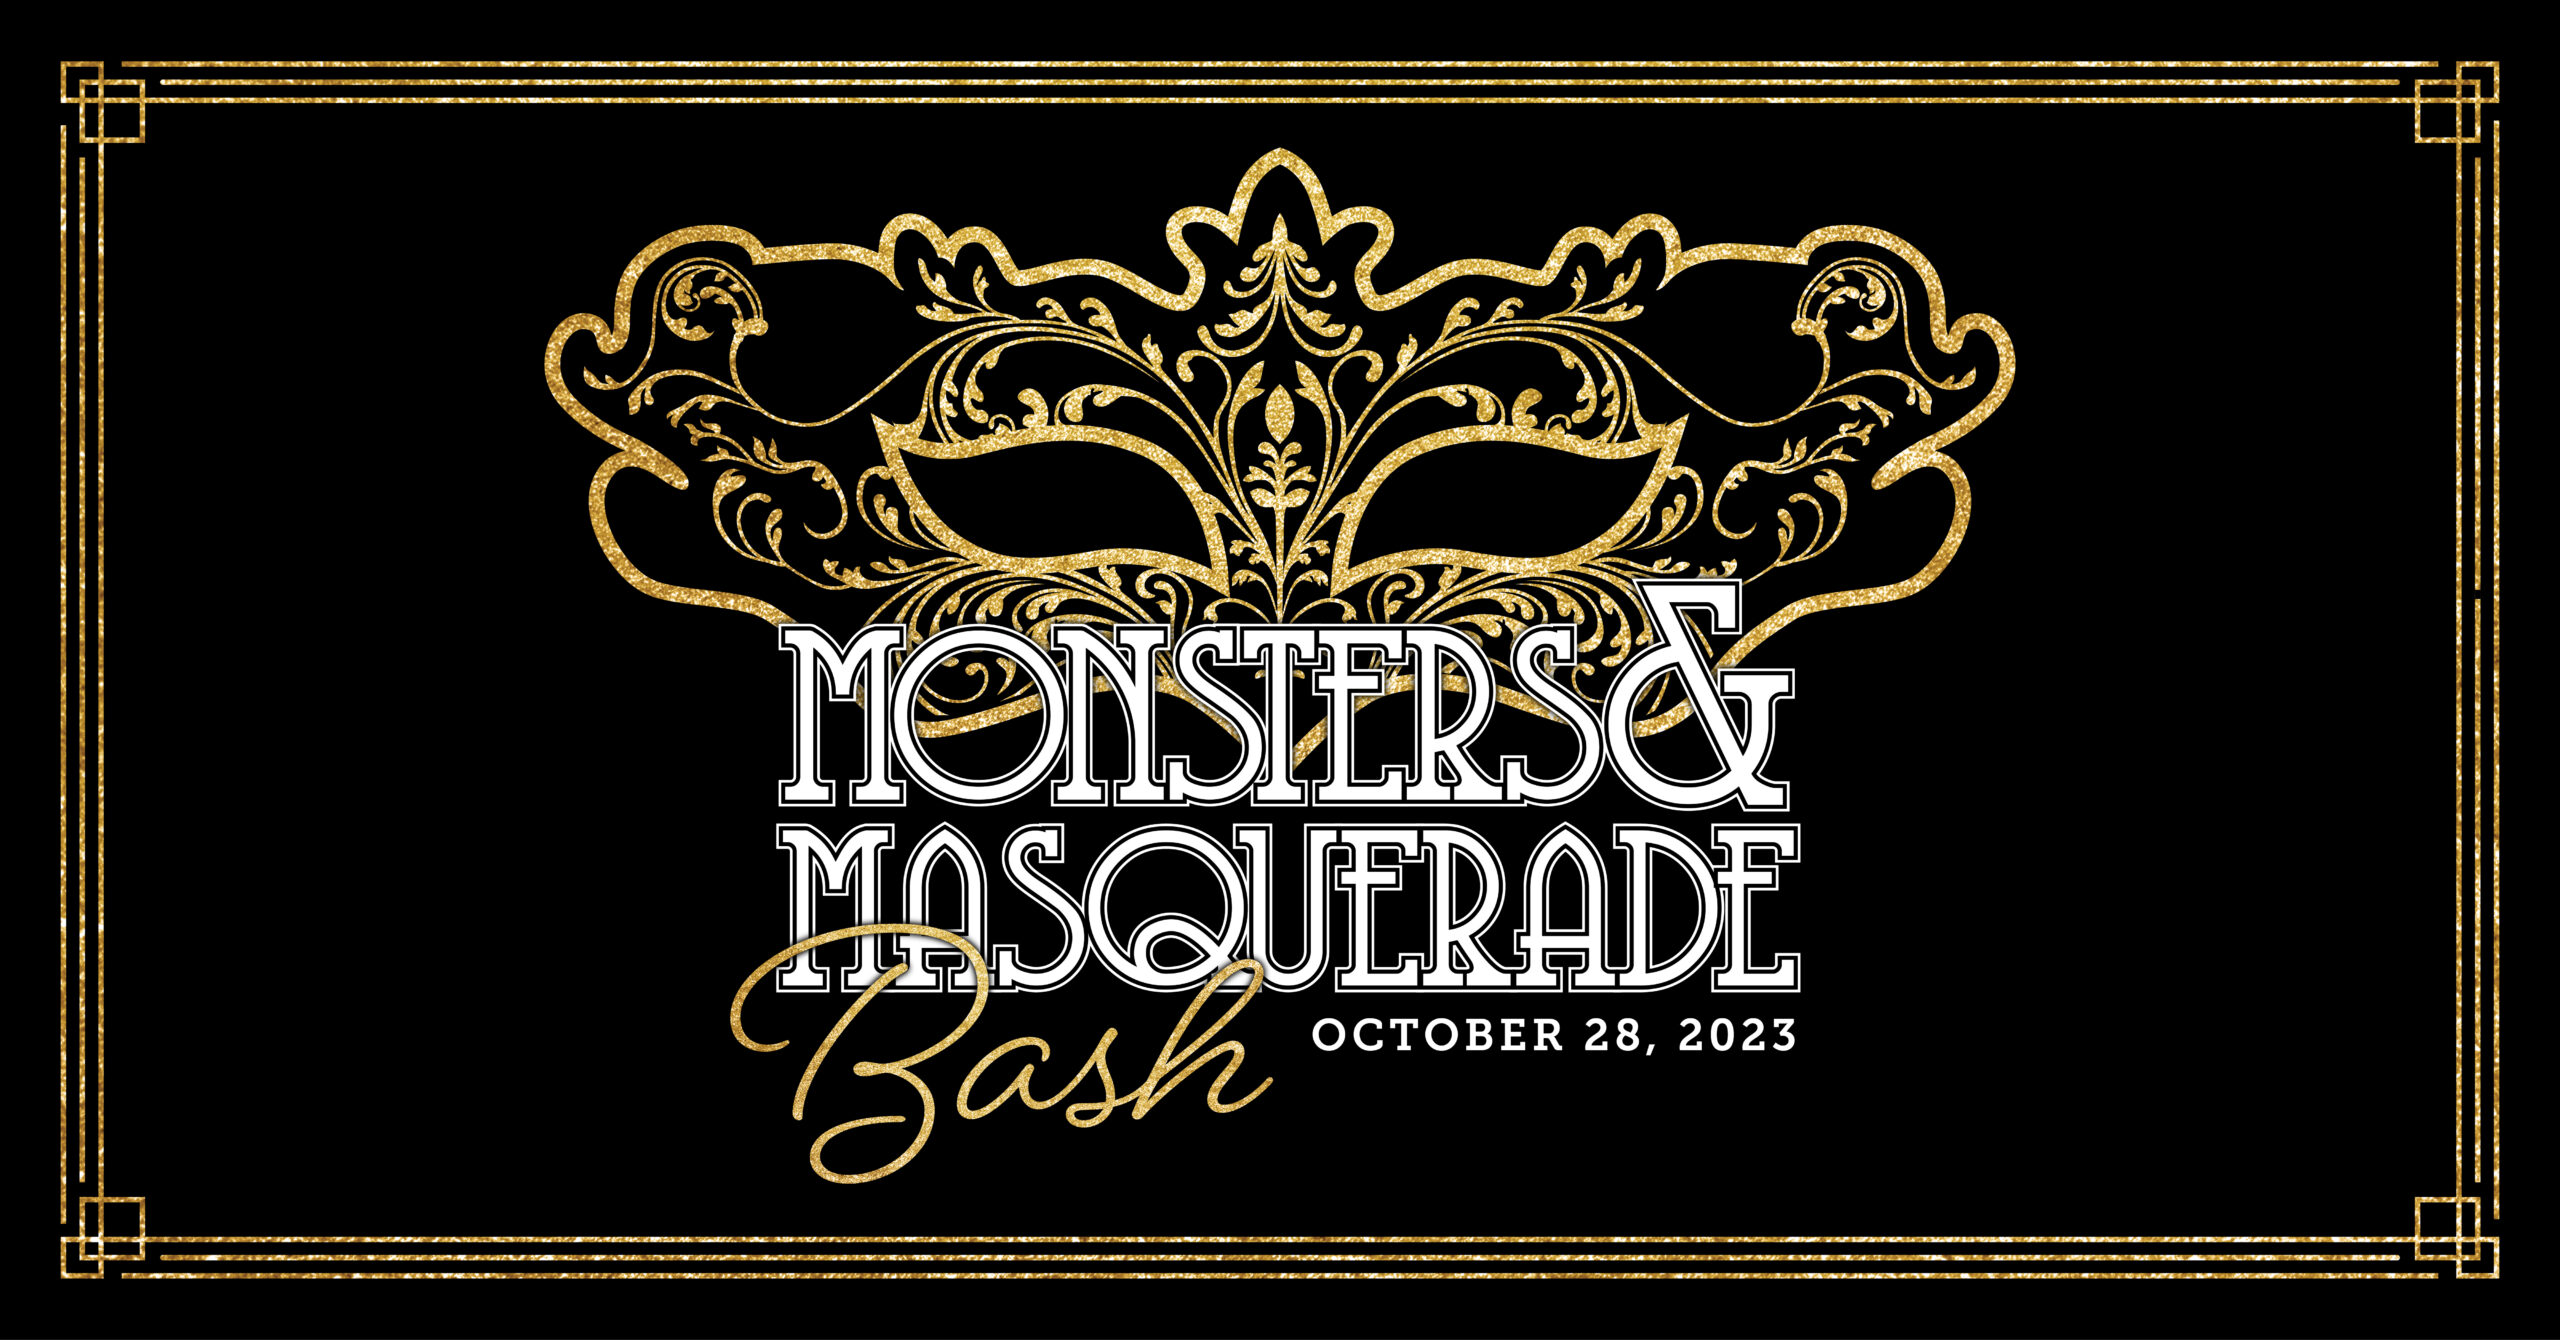 Monster Masquerade Bash on a Black Background